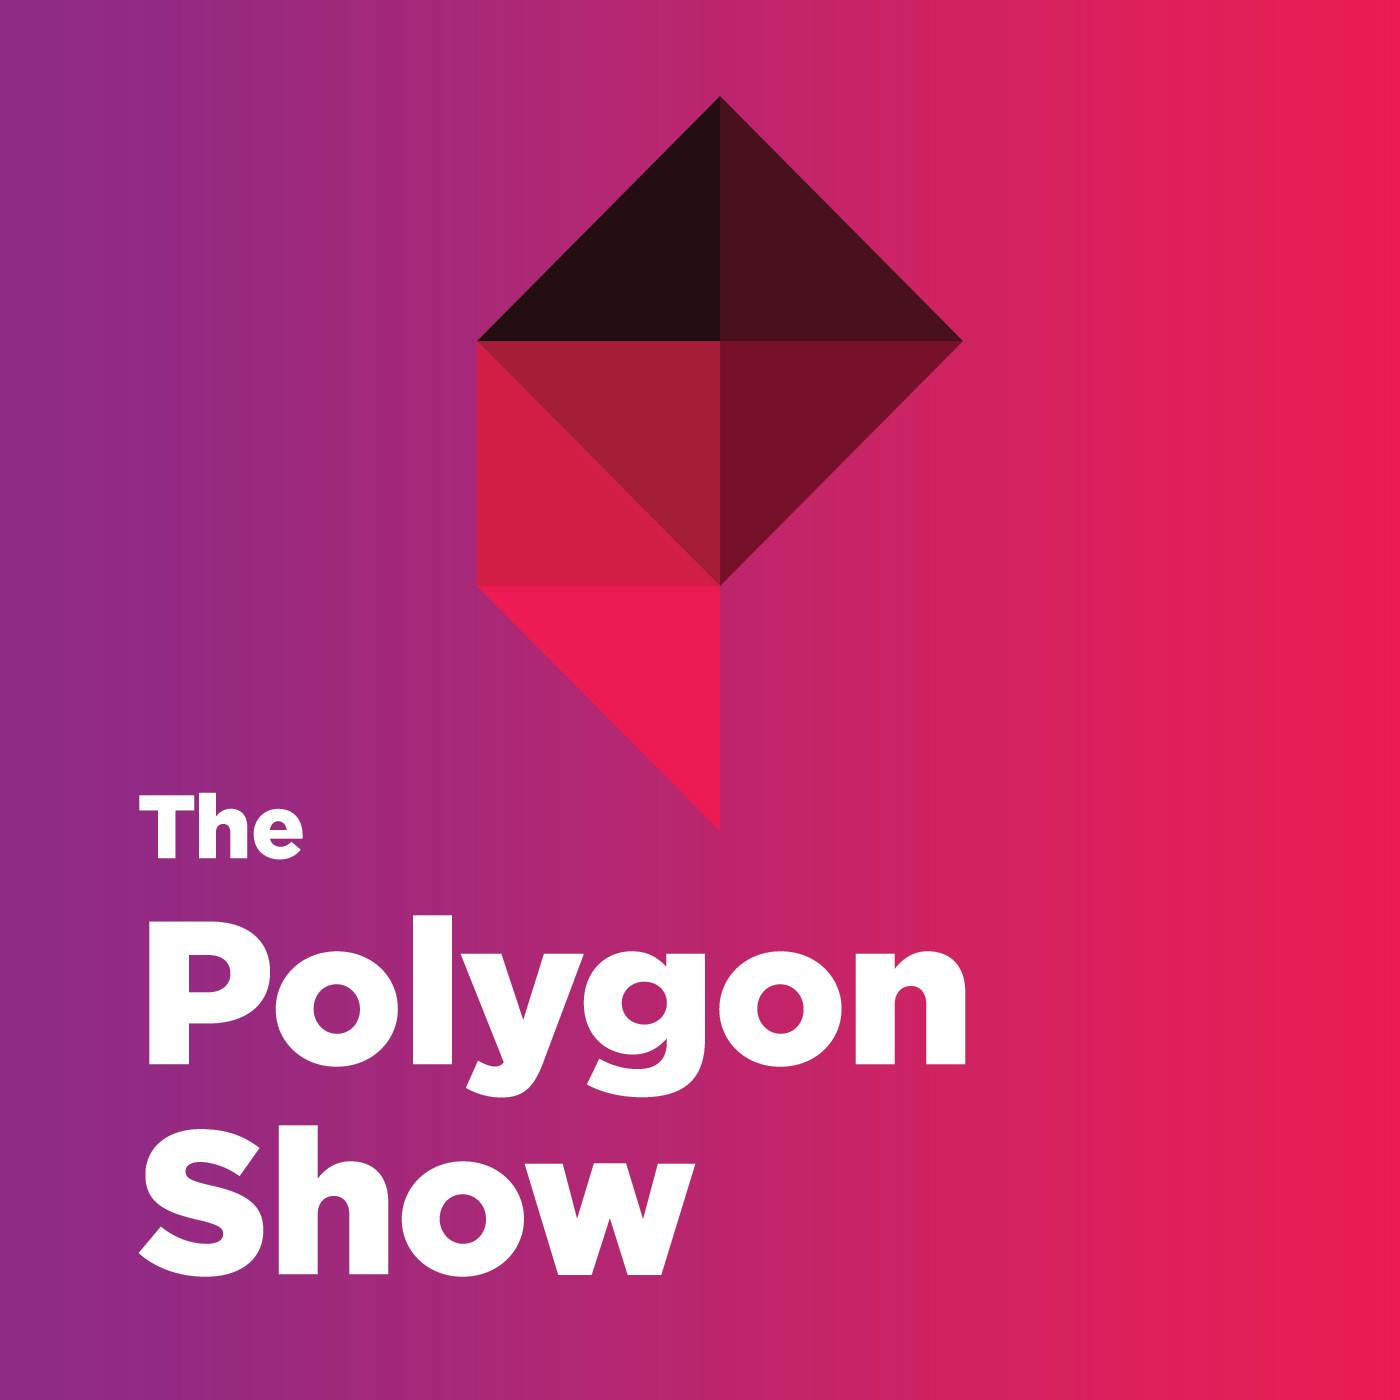 The Polygon Show is Coming!